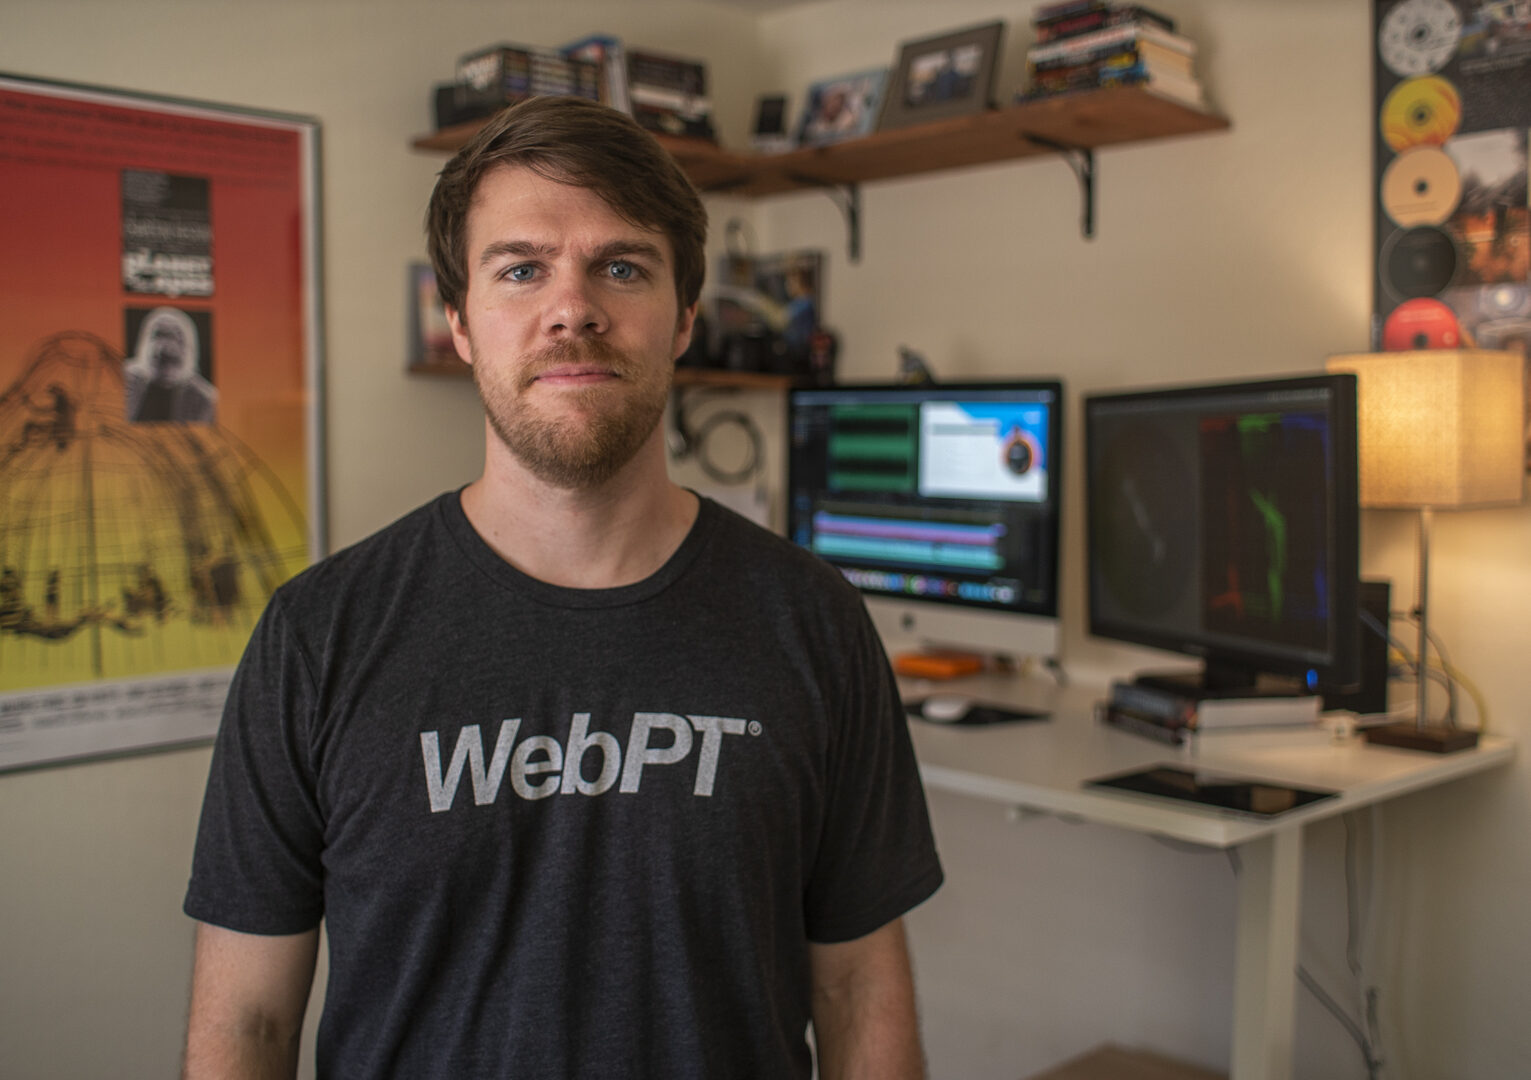 Guest Blog: Boosting Morale In The Age of COVID: How WebPT Keeps Its Remote Team Connected